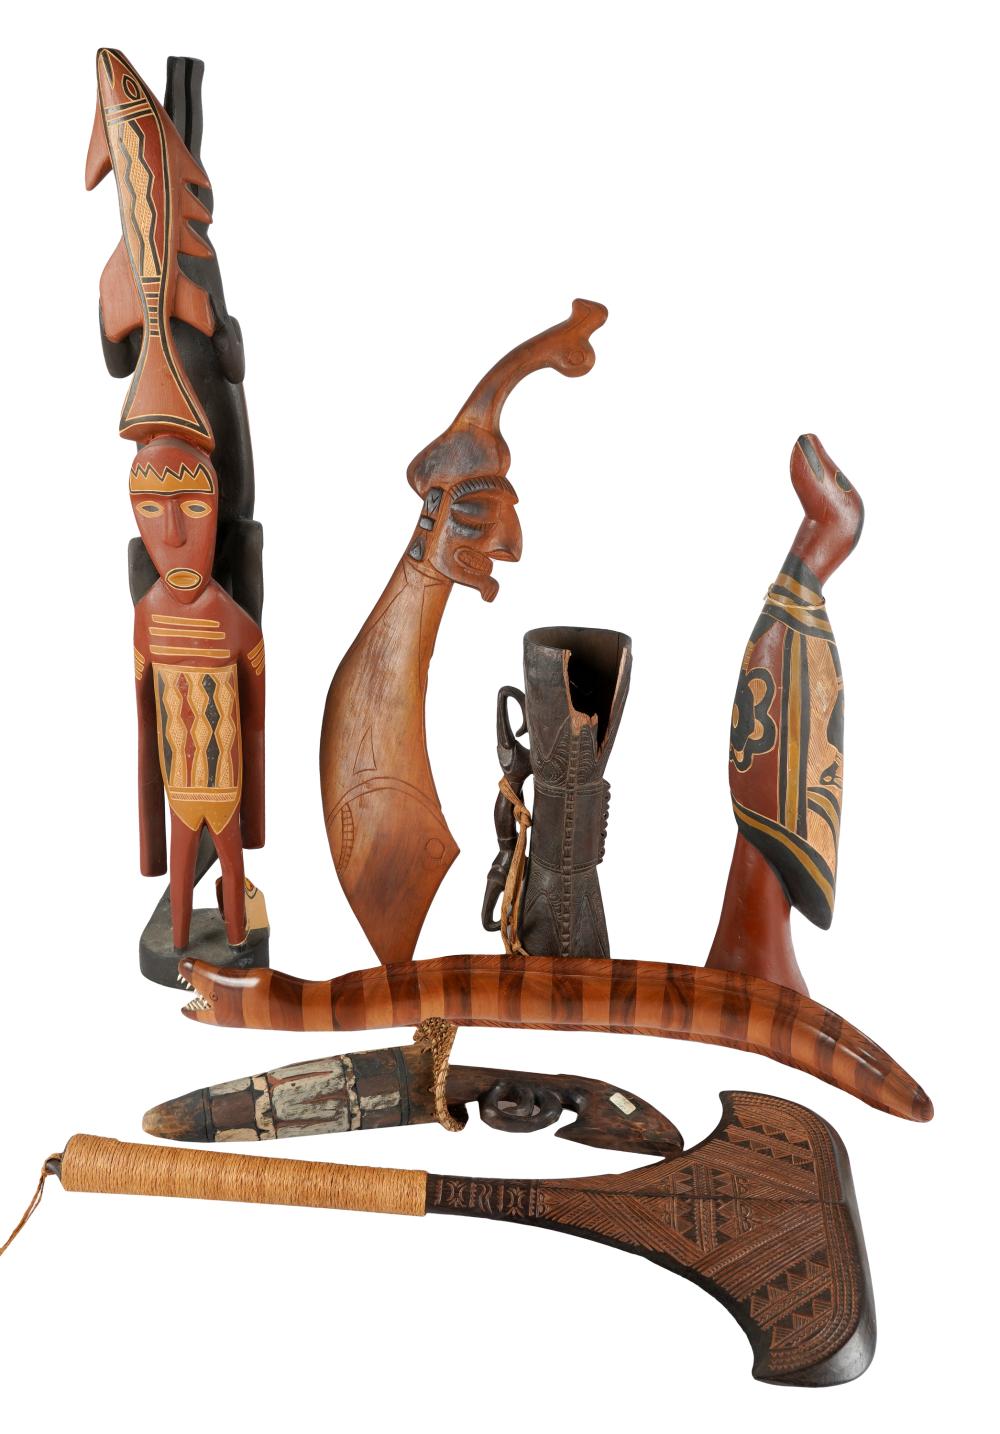 COLLECTION OF PRIMITIVE WOOD CARVINGScomprising